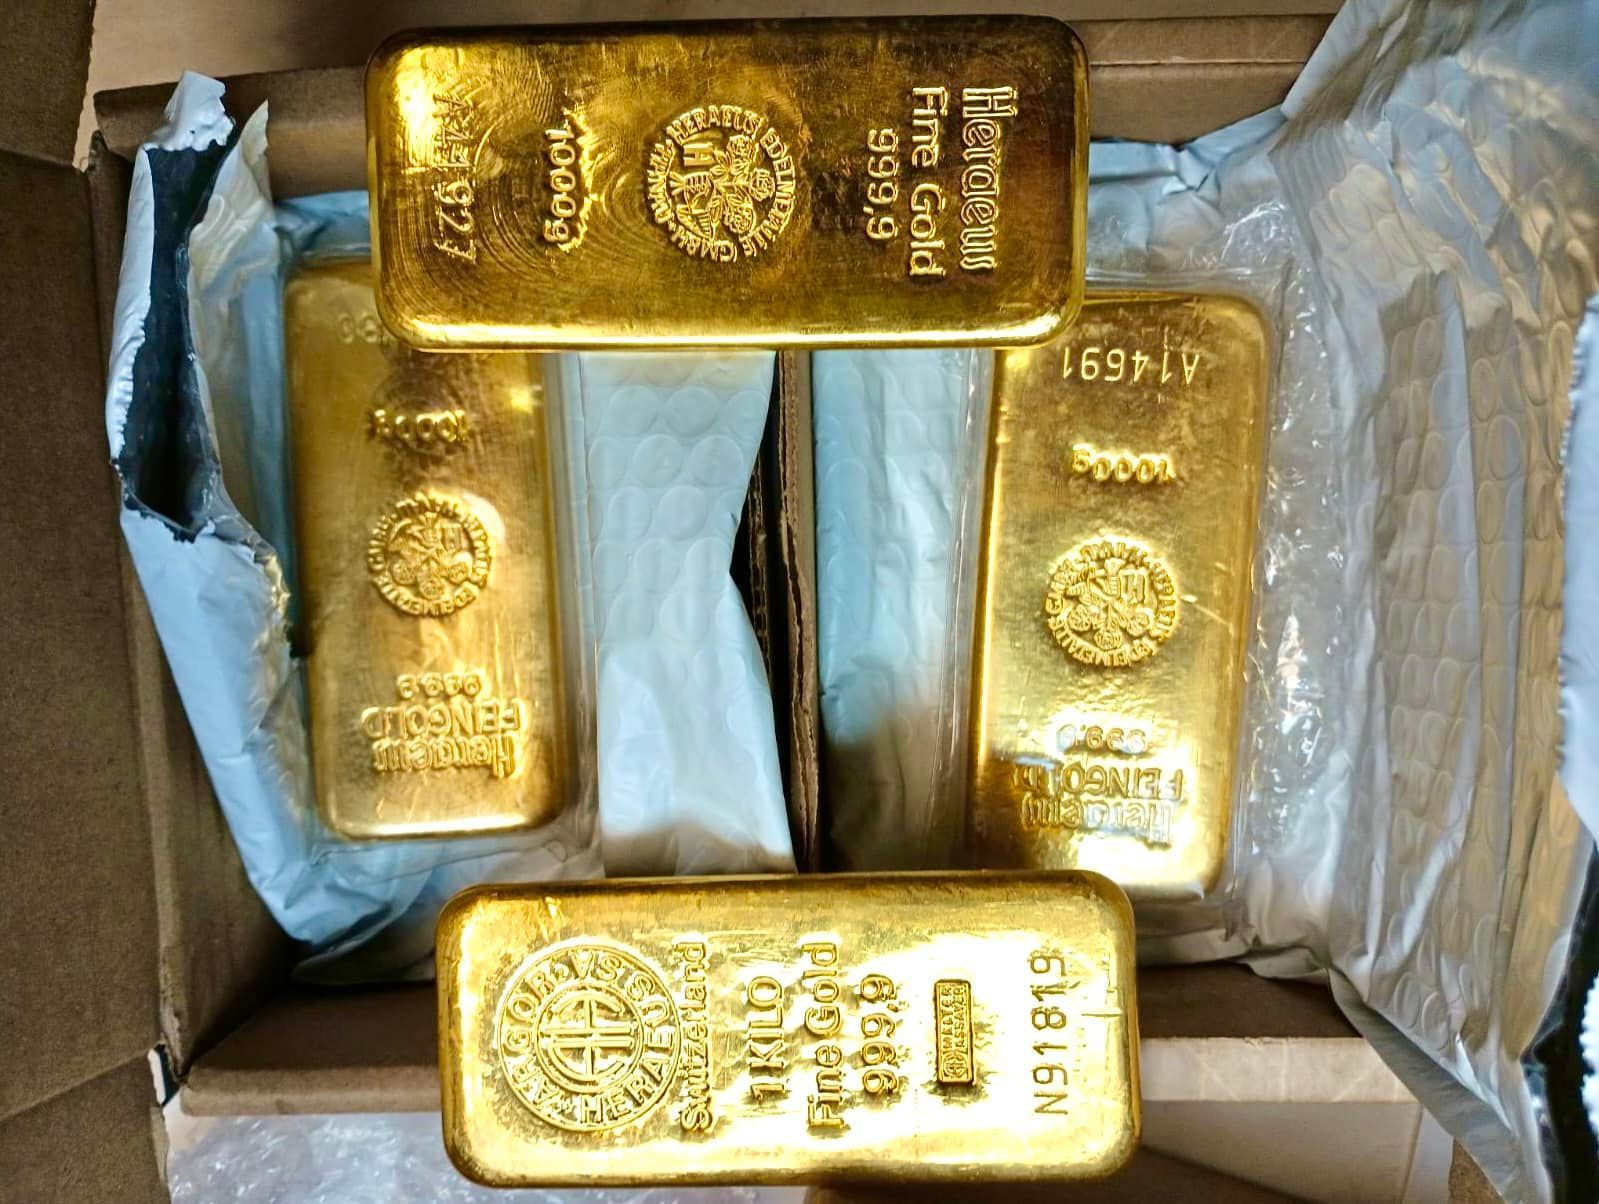 Four gold bars are sitting in a cardboard box